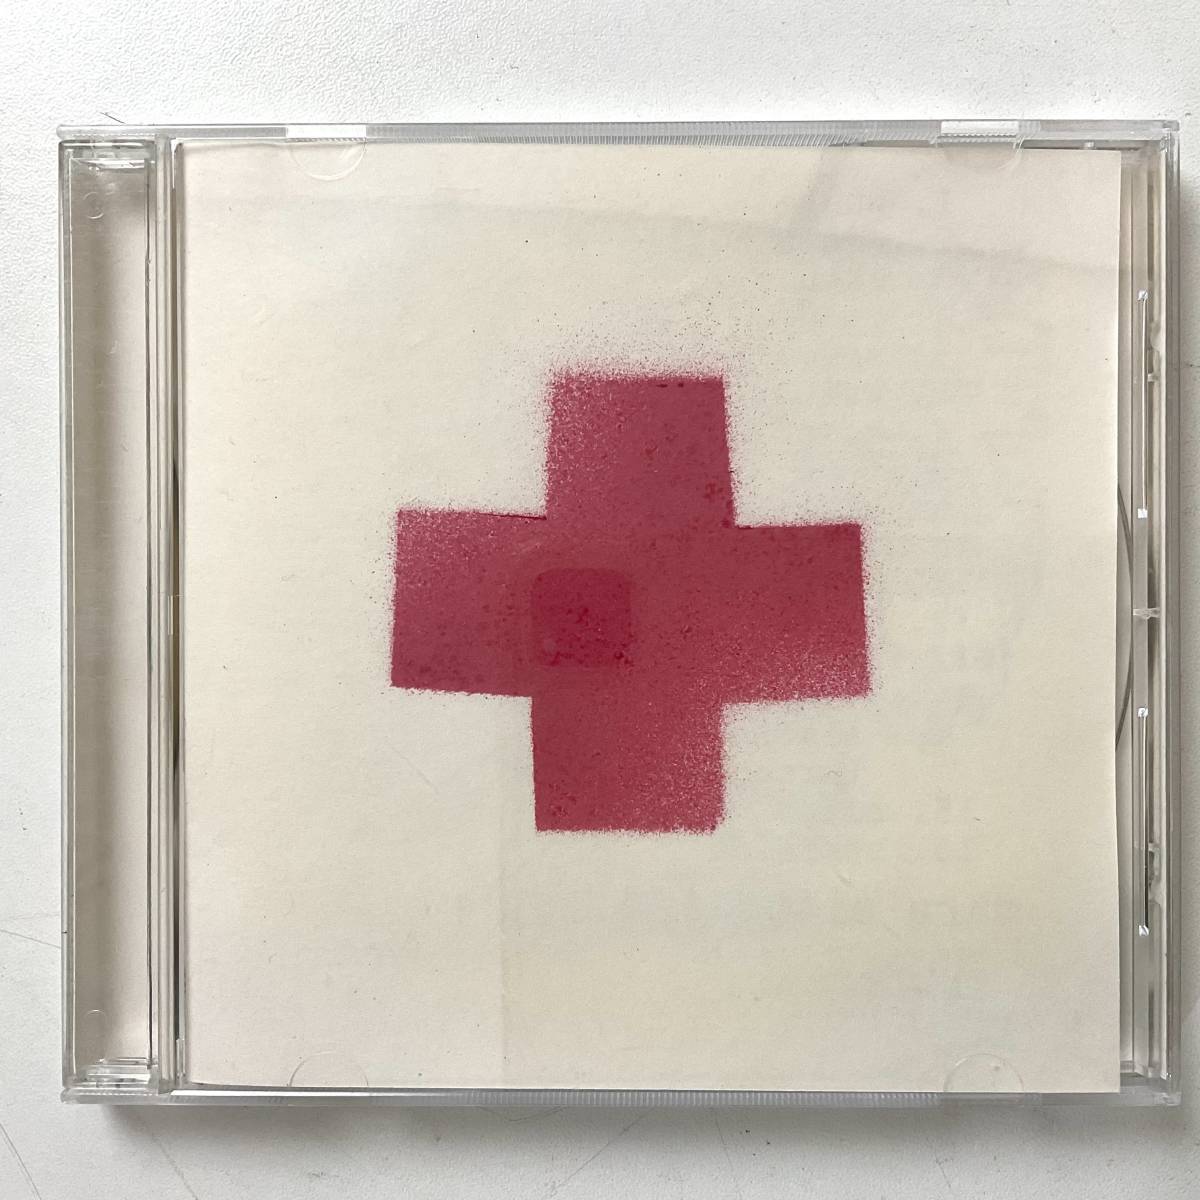 US Original CD レア盤 HIS NAME IS ALIVE The Emergency LP 2000年 入手困難 AMERICAN INDIE ROCK BAND_His Name Is Alive